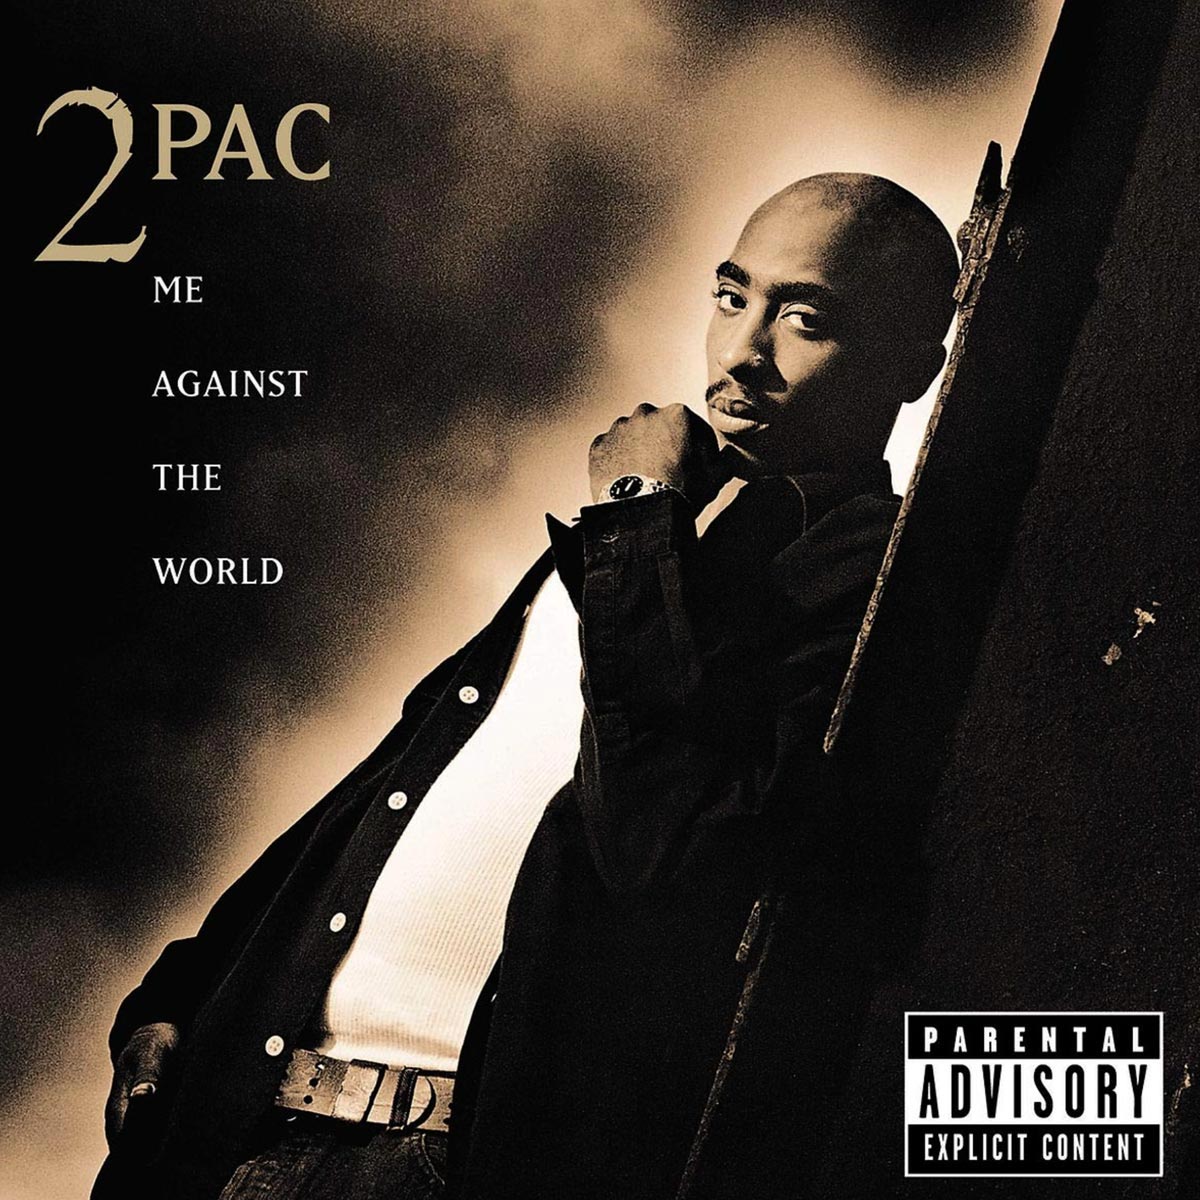 2Pac - Me Against The World (180g) - 2 x LP